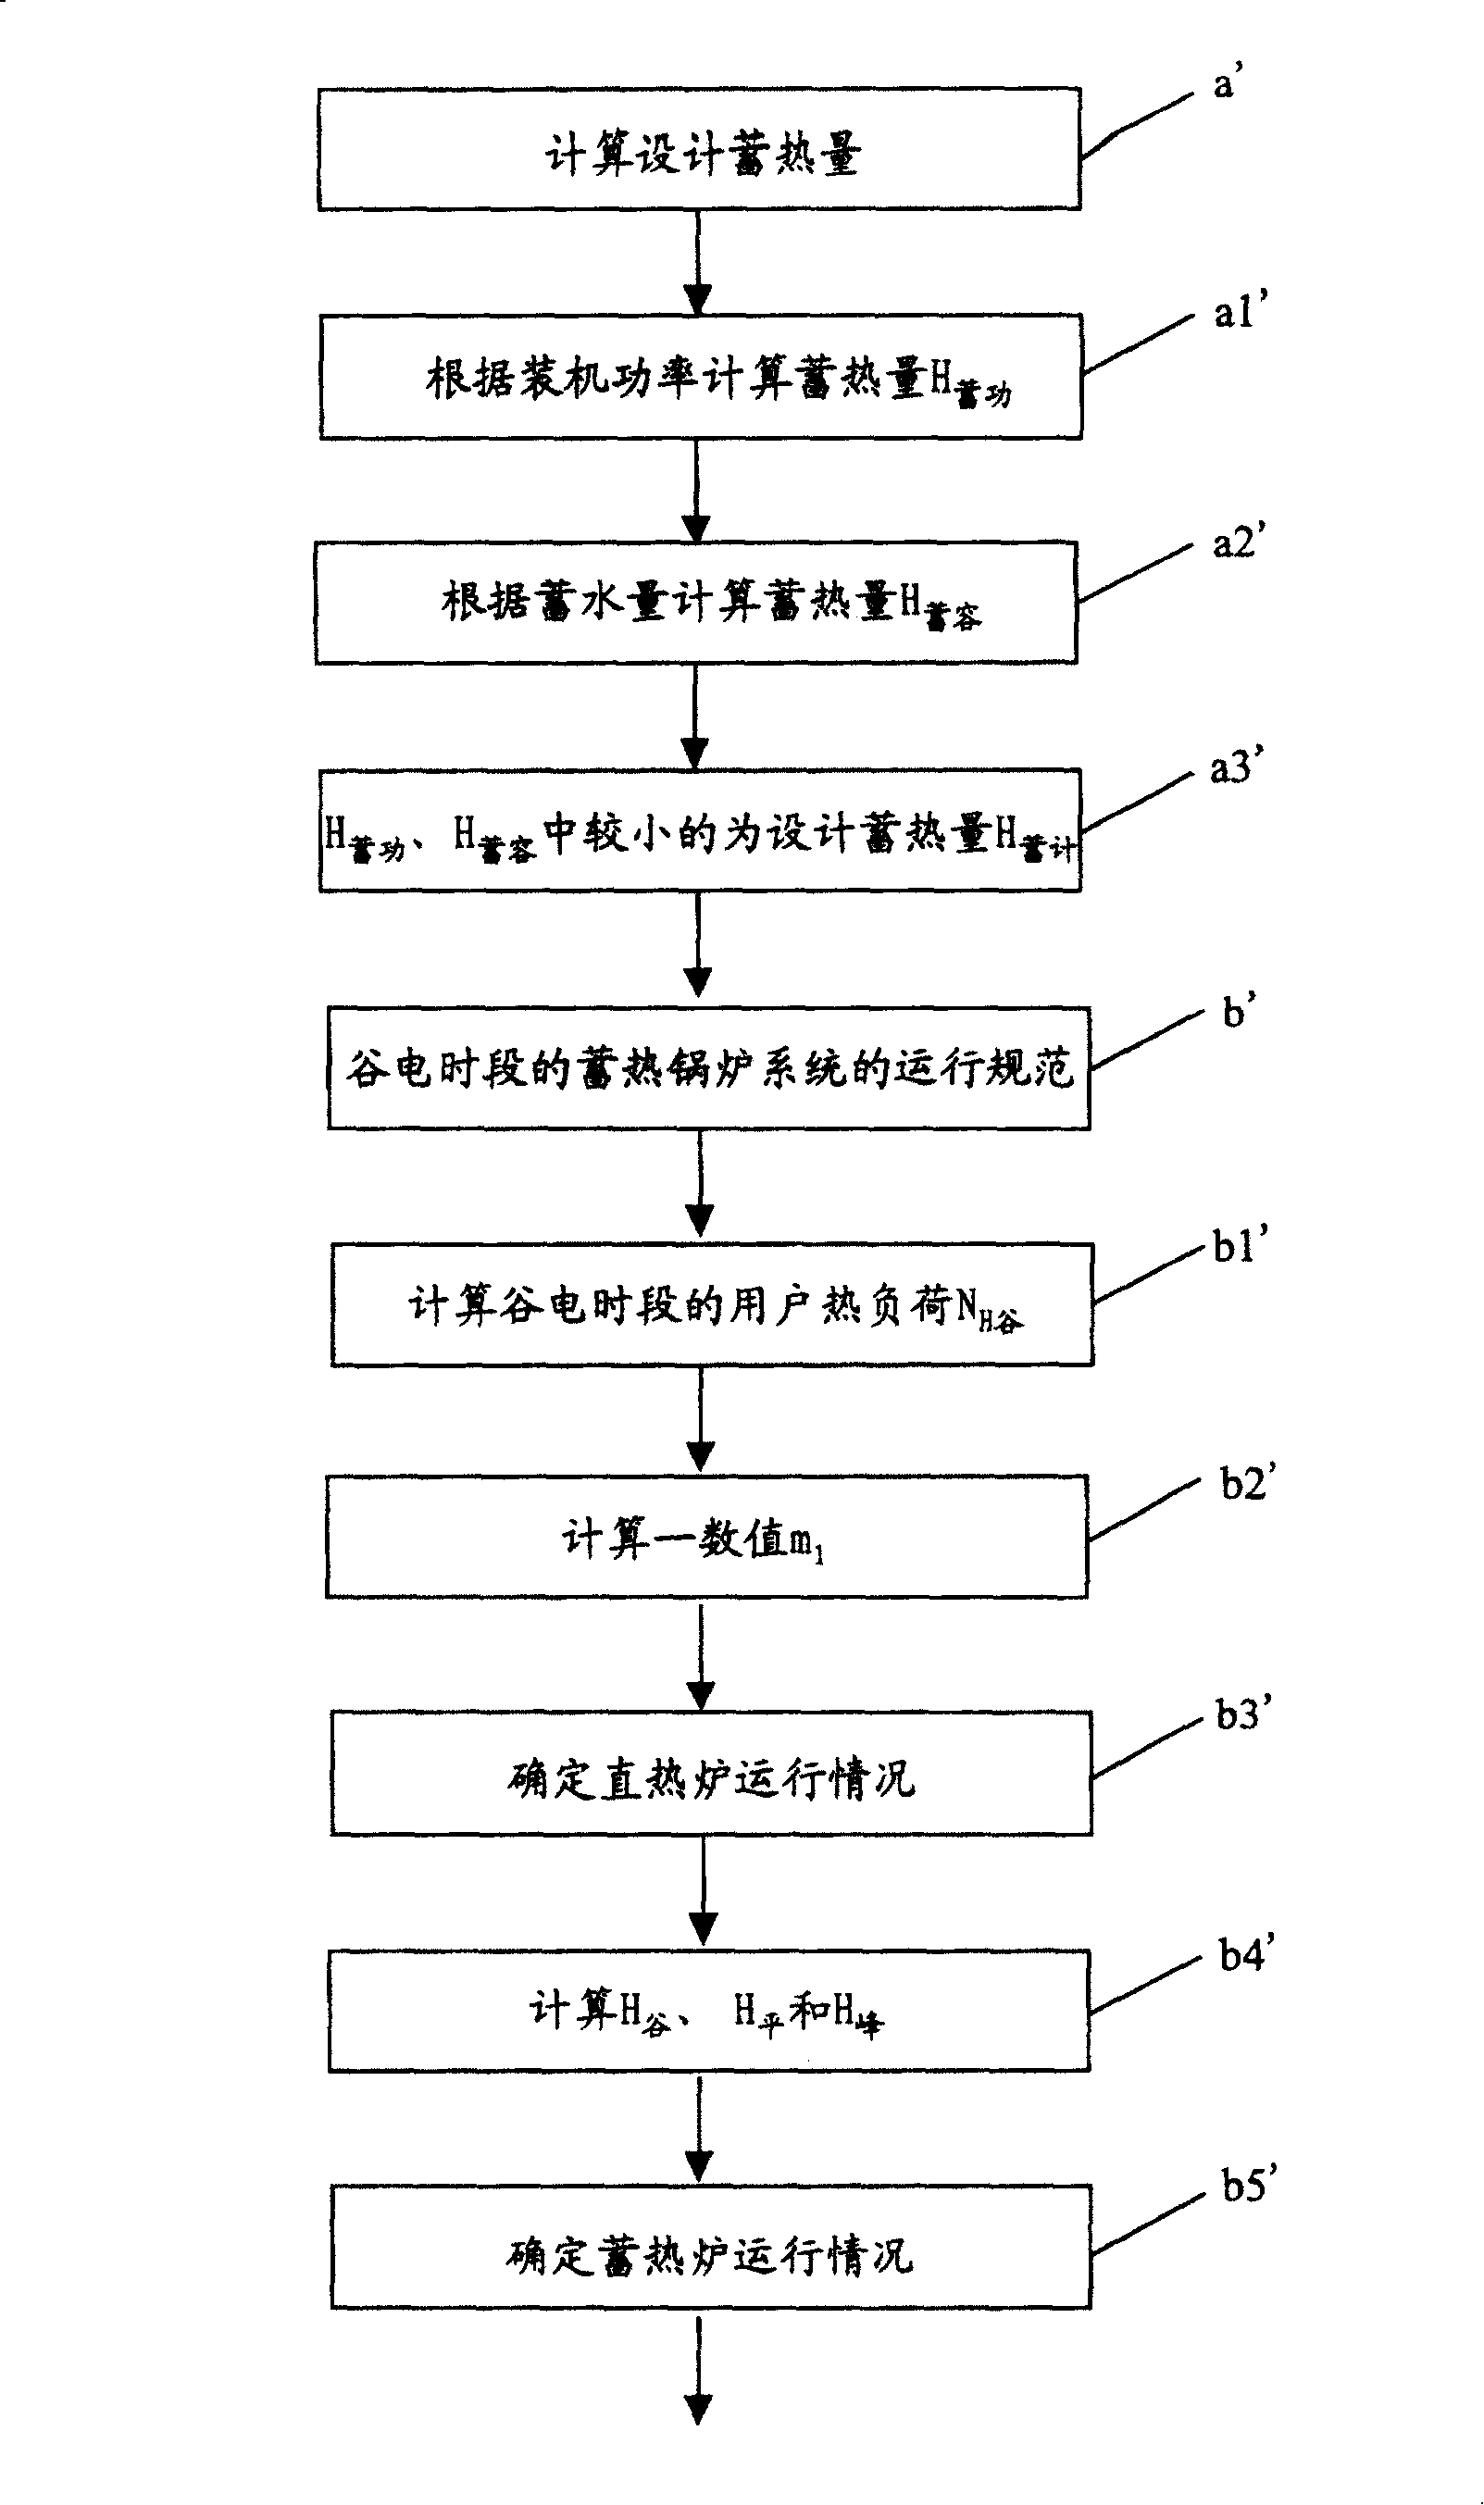 Heating load prediction and control method for heat storage boiler system